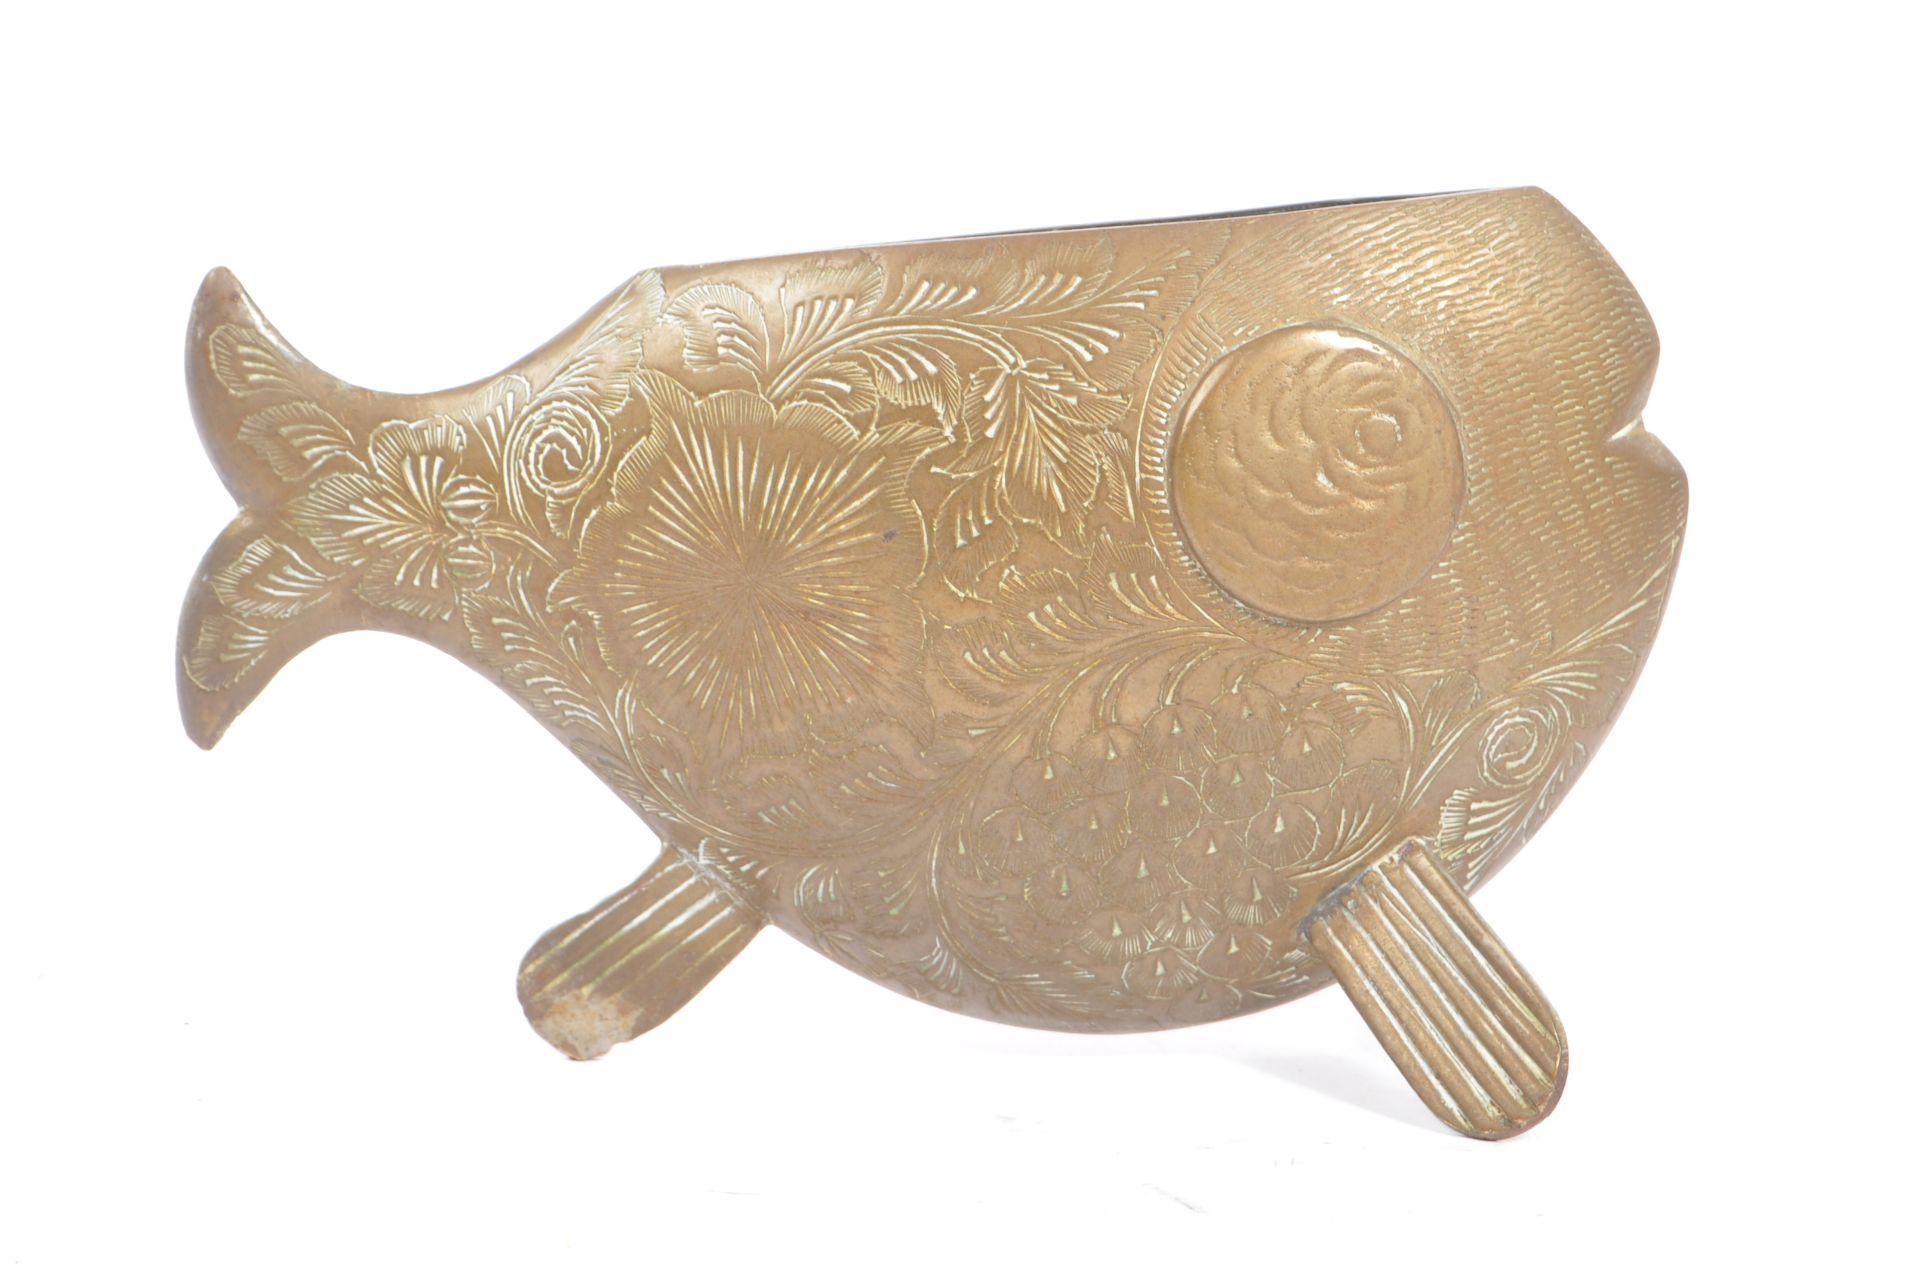 EARLY 20TH CENTURY ENGRAVED BRASS FISH ORNAMENT